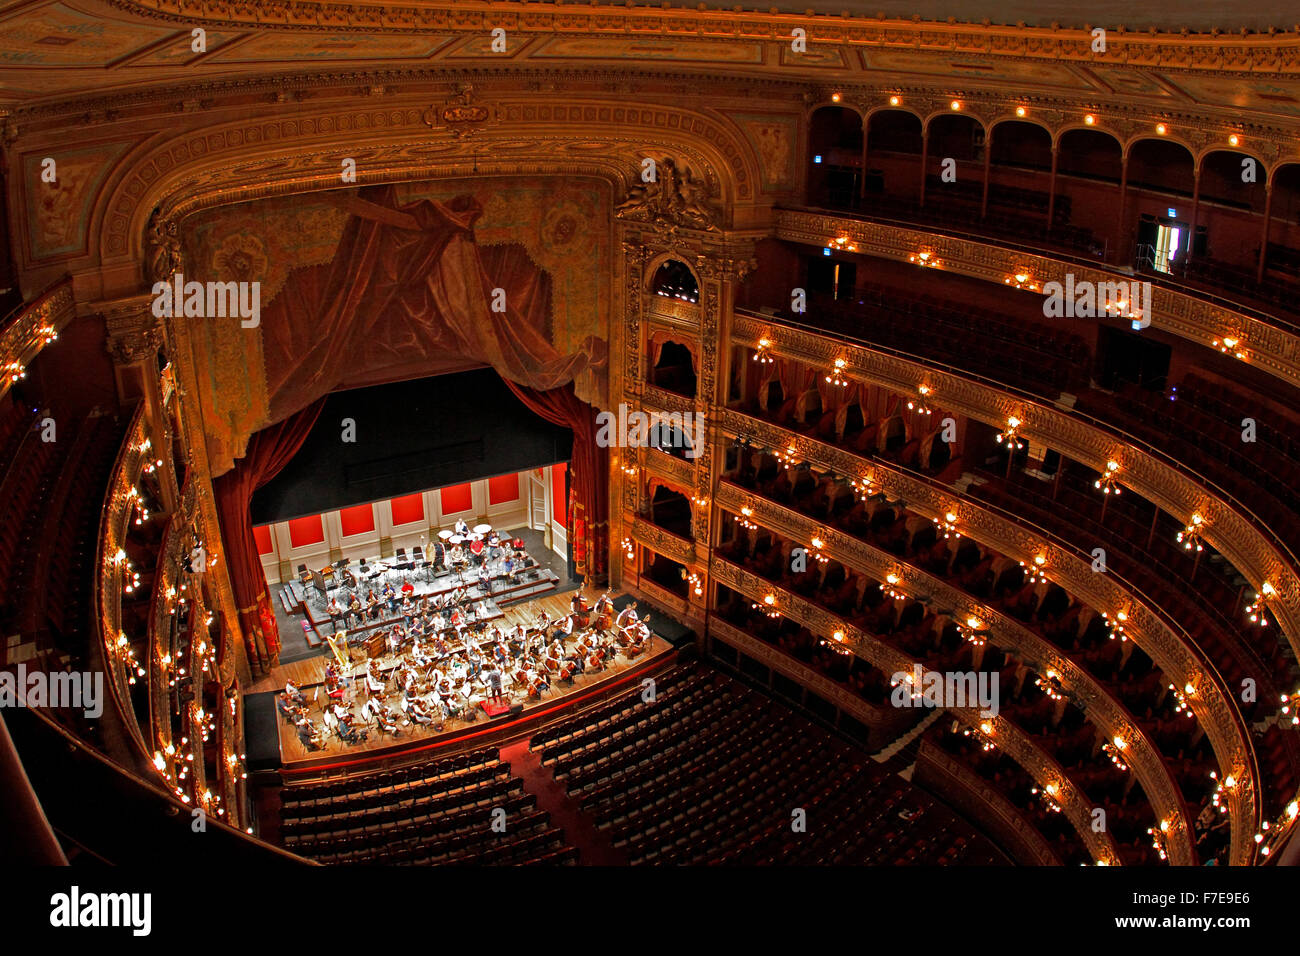 The Teatro Colón, Columbus Theatre, is the main opera house in Buenos